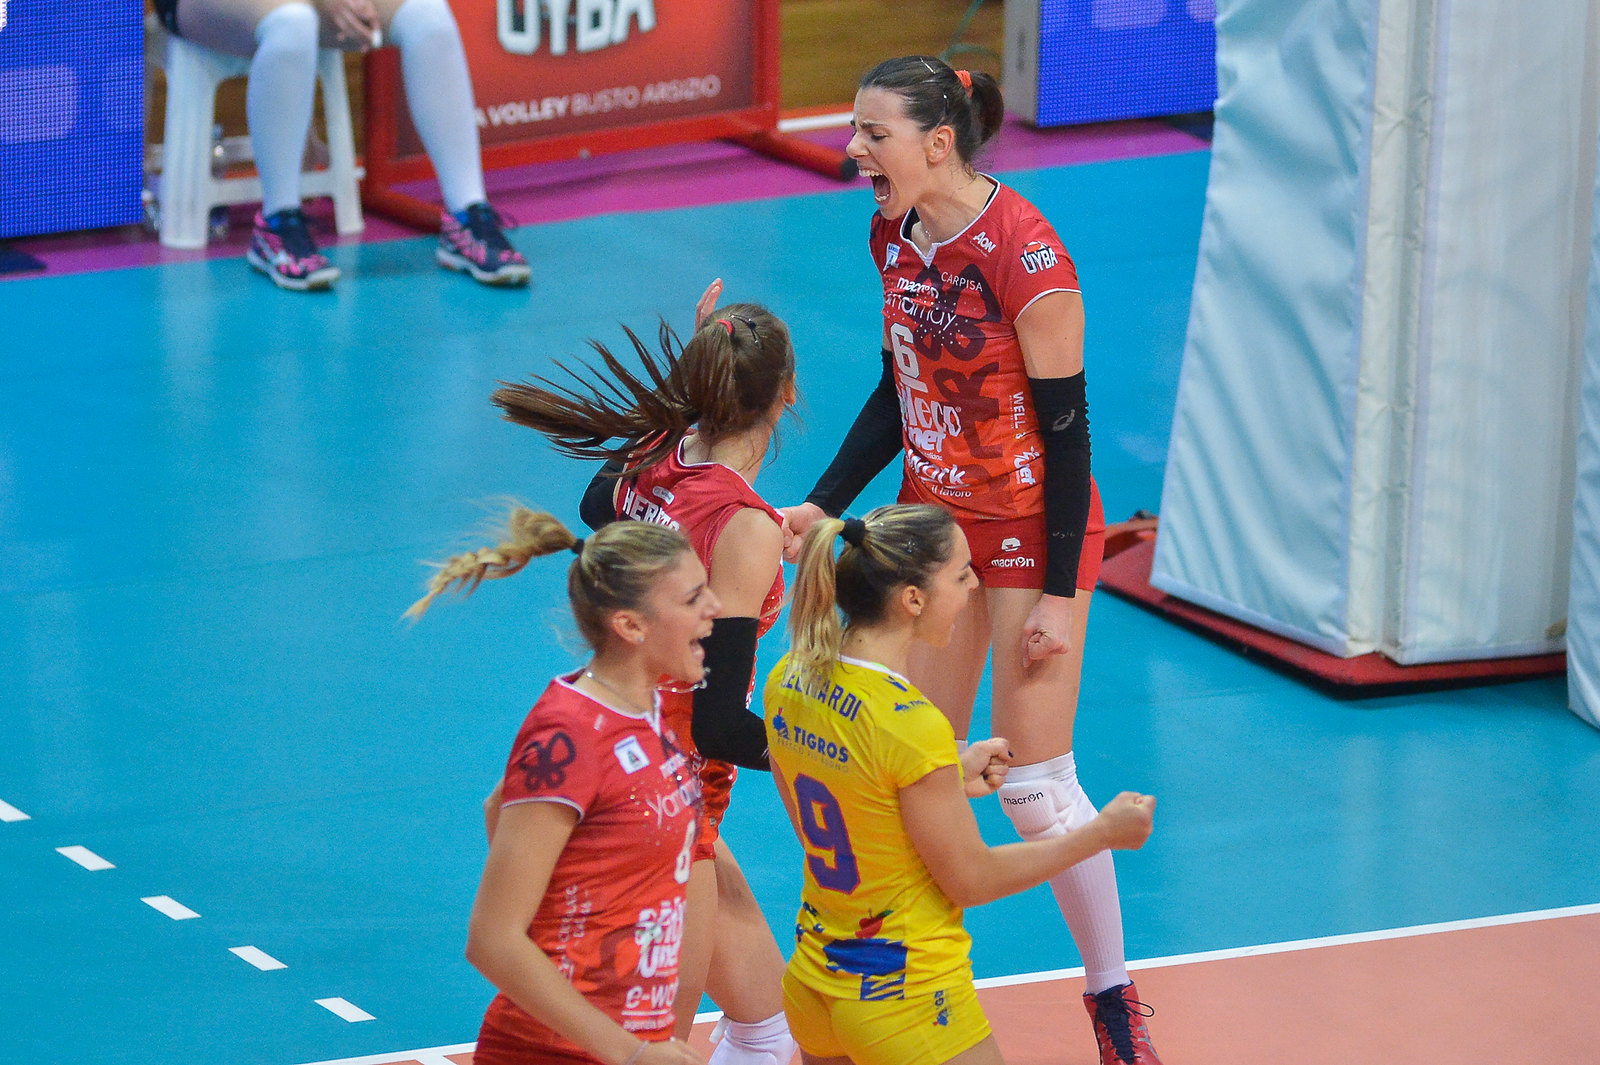 CEV Volleyball CUP 2019 - Yamamay E-Work Busto Arsizio - ASPTT Mulhouse VB